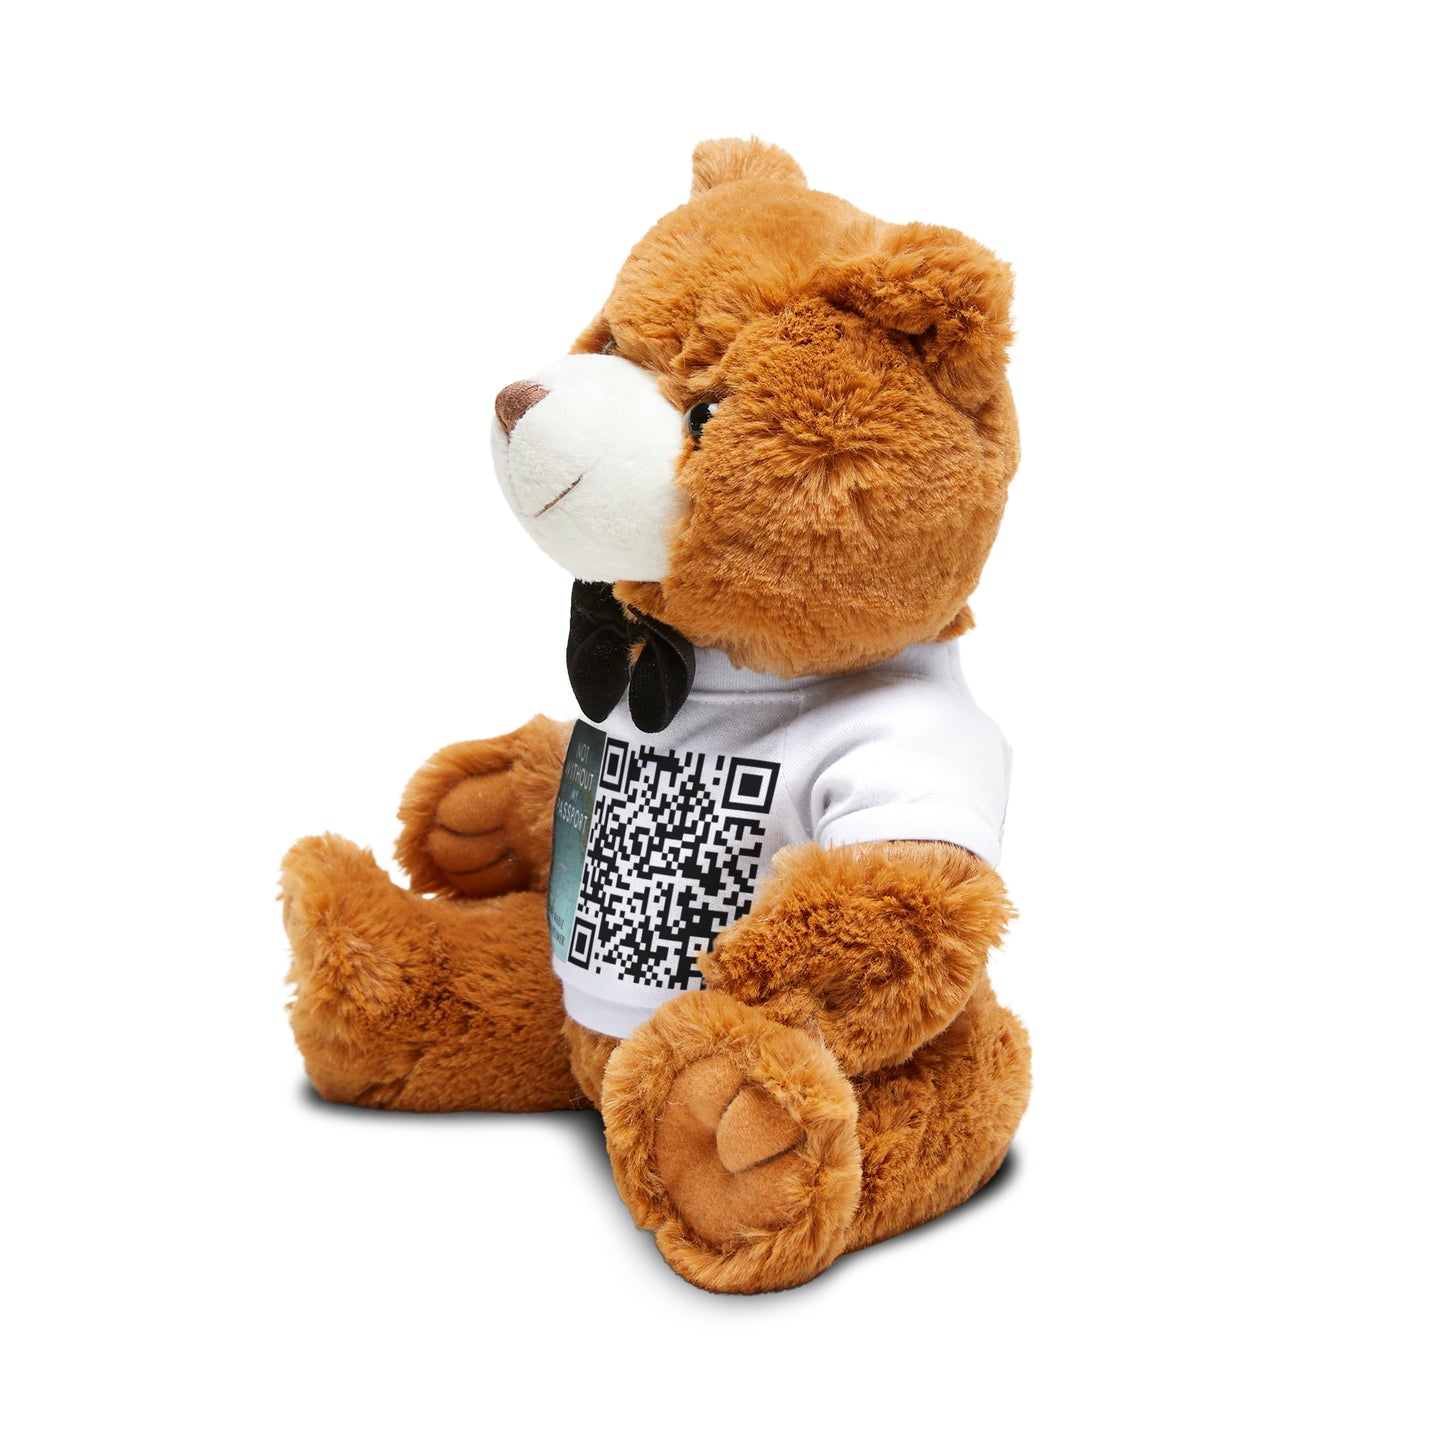 Not Without My Passport - Teddy Bear